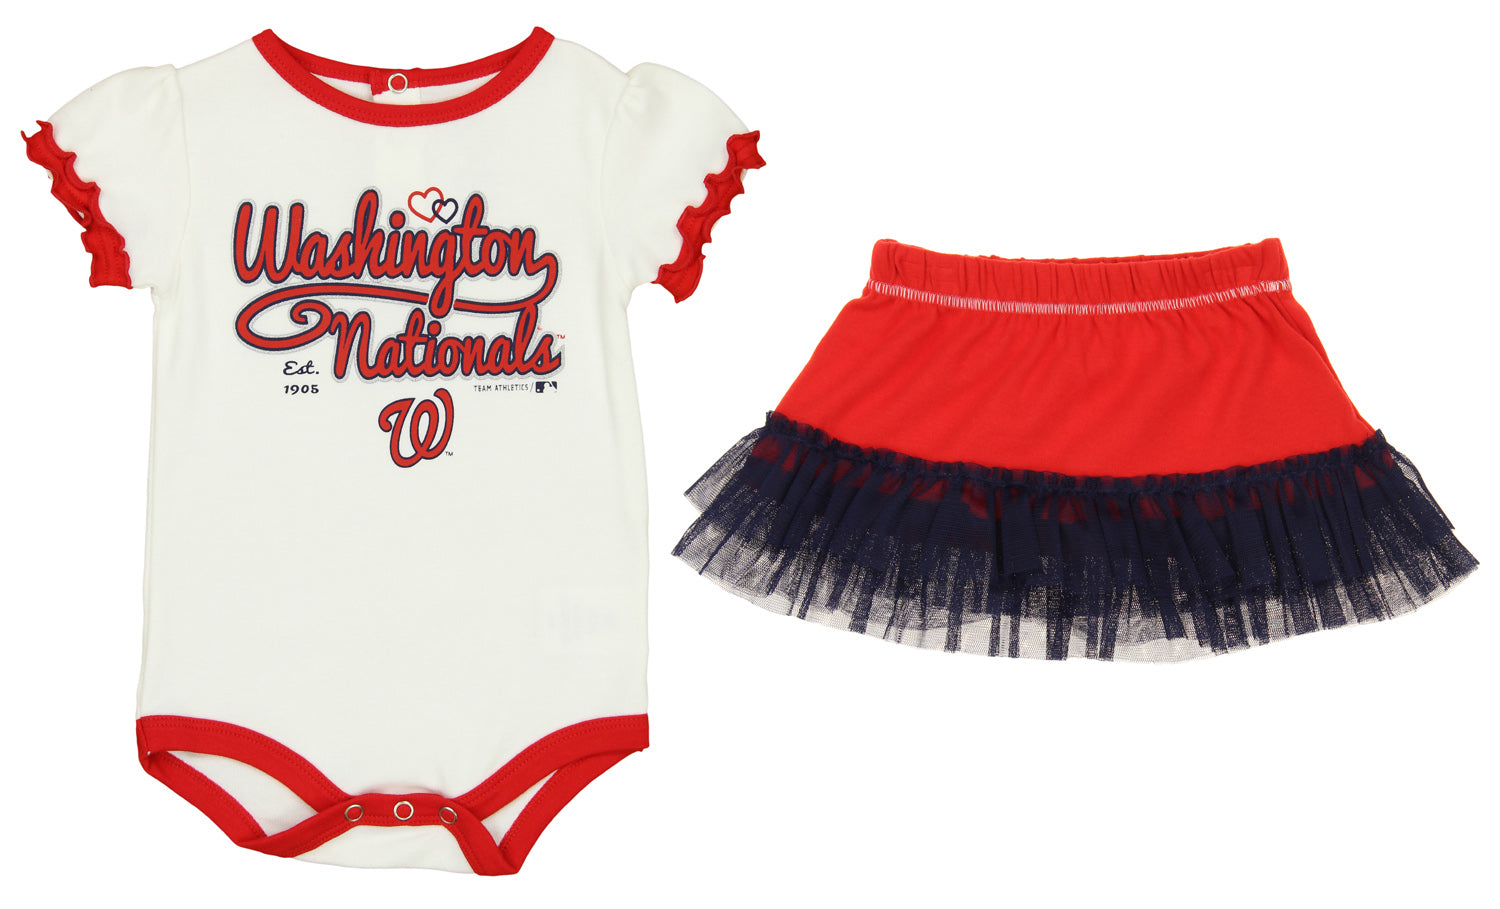 Outerstuff MLB Infants Washington Nationals Home Field Dress with Bloomer